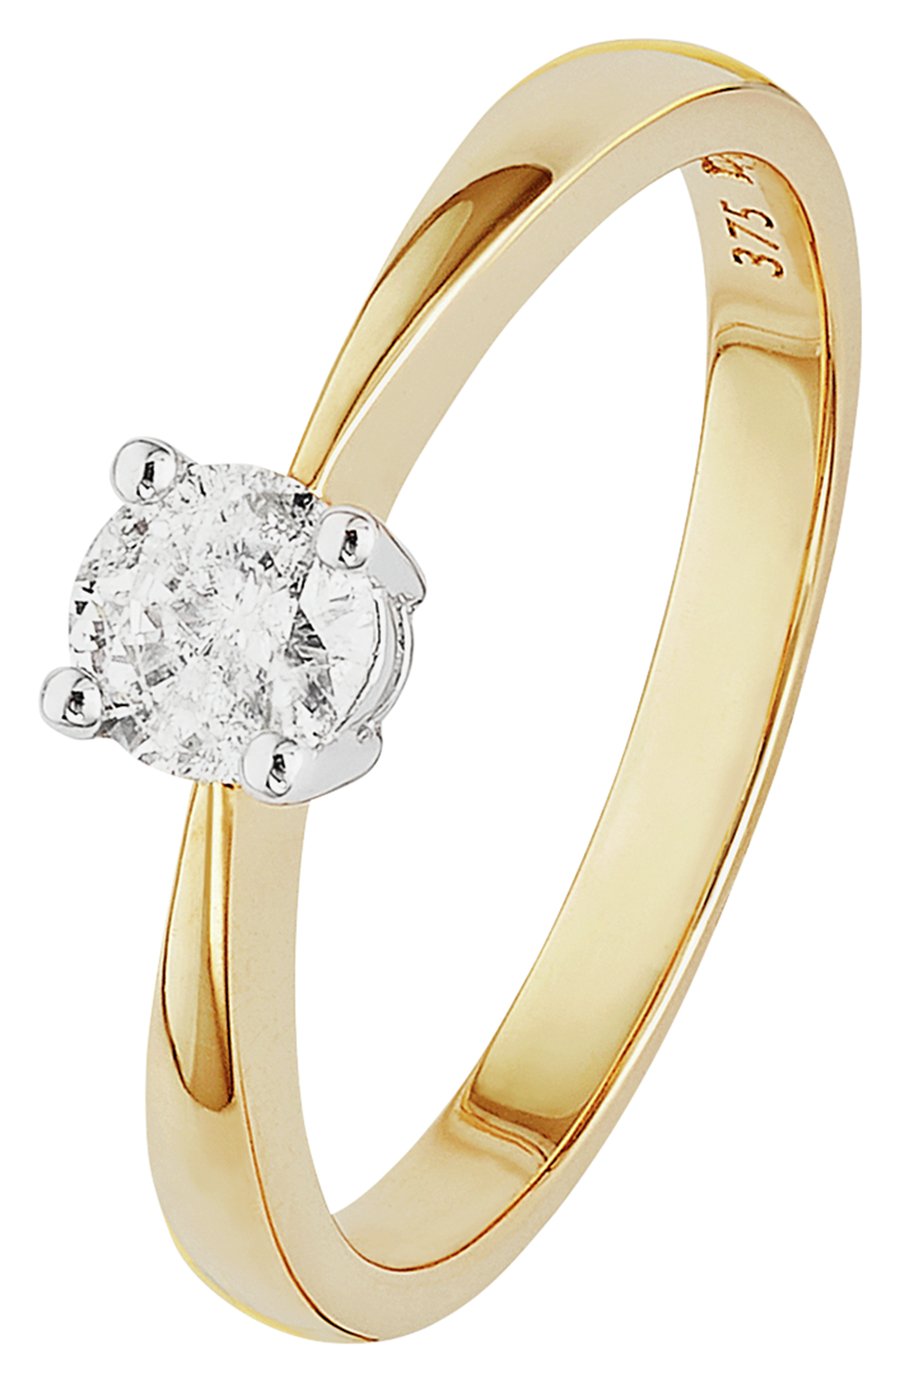 Revere 9ct Gold 0.33ct Diamond Solitaire Ring - N